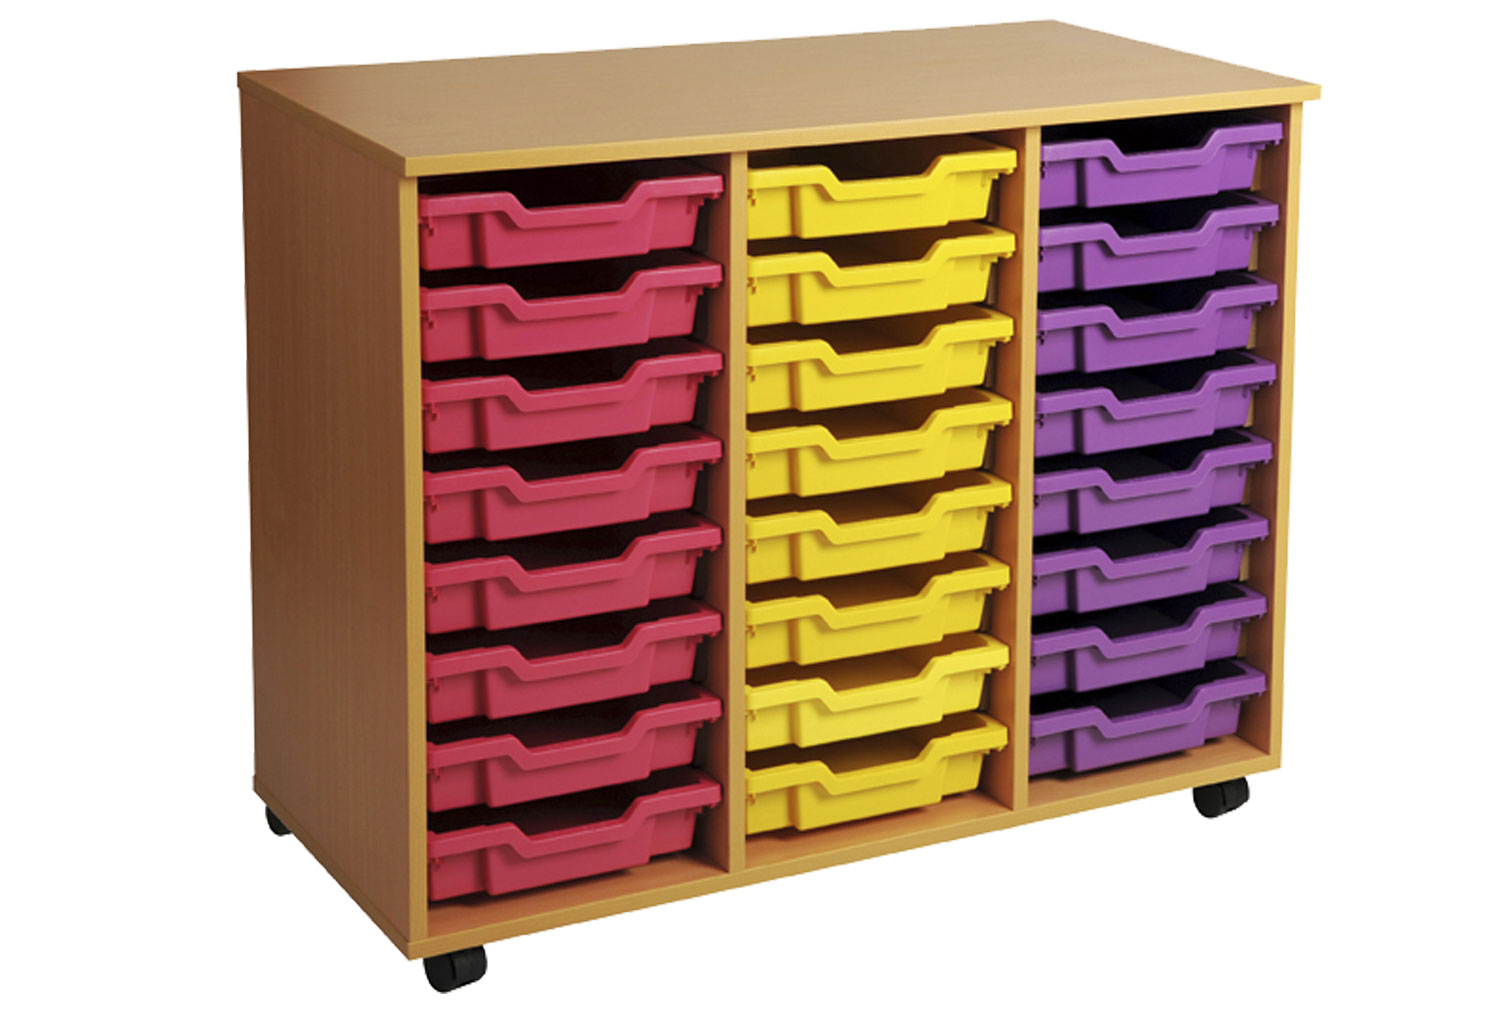 Primary Triple Column Mobile Classroom Tray Storage Unit With 24 Shallow Classroom Trays, Beech/ Translucent Classroom Trays